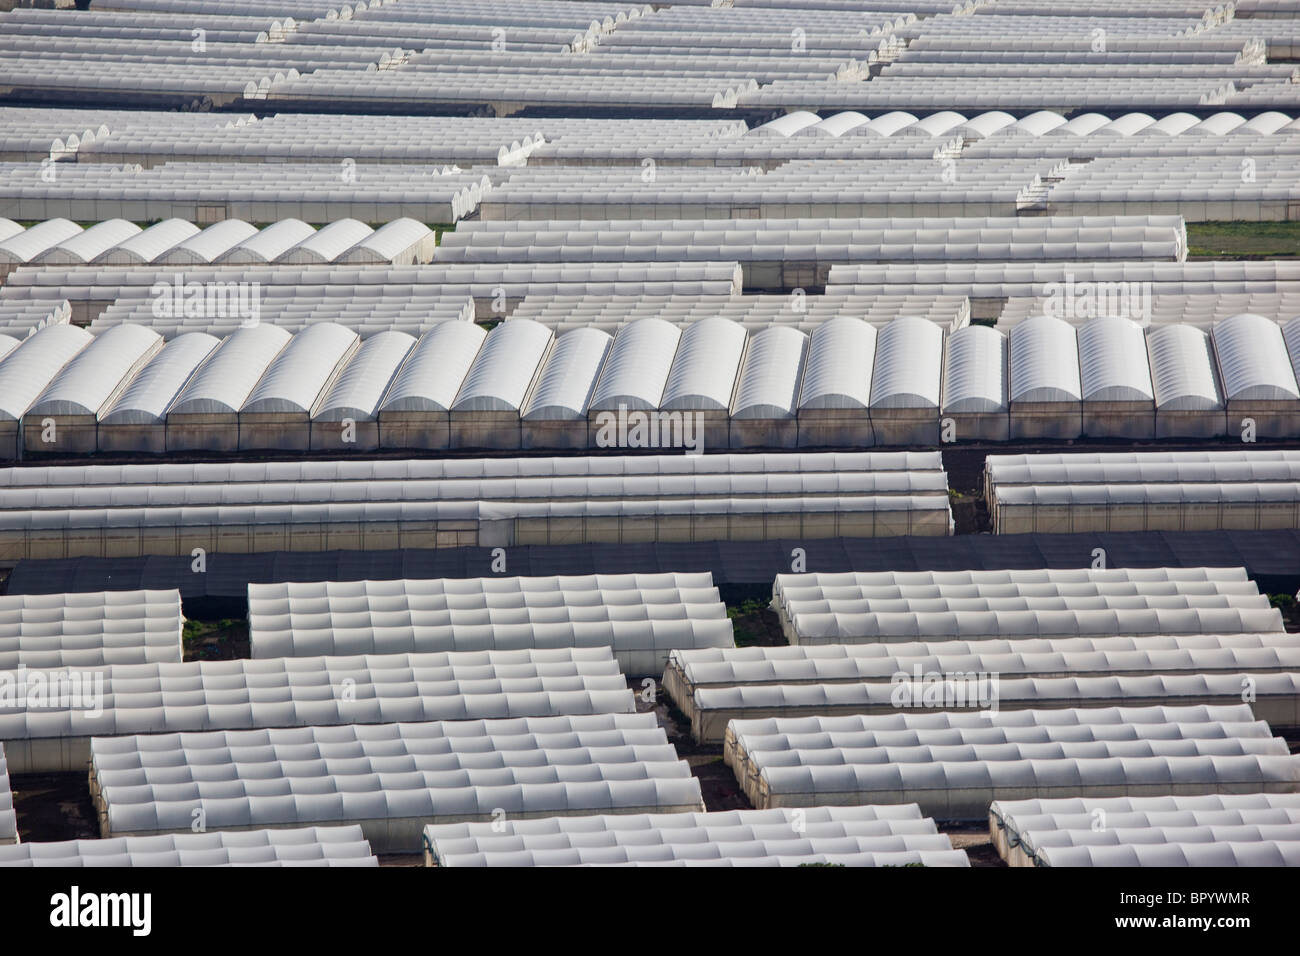 Abstract view of greenhouses in the Sharon Stock Photo